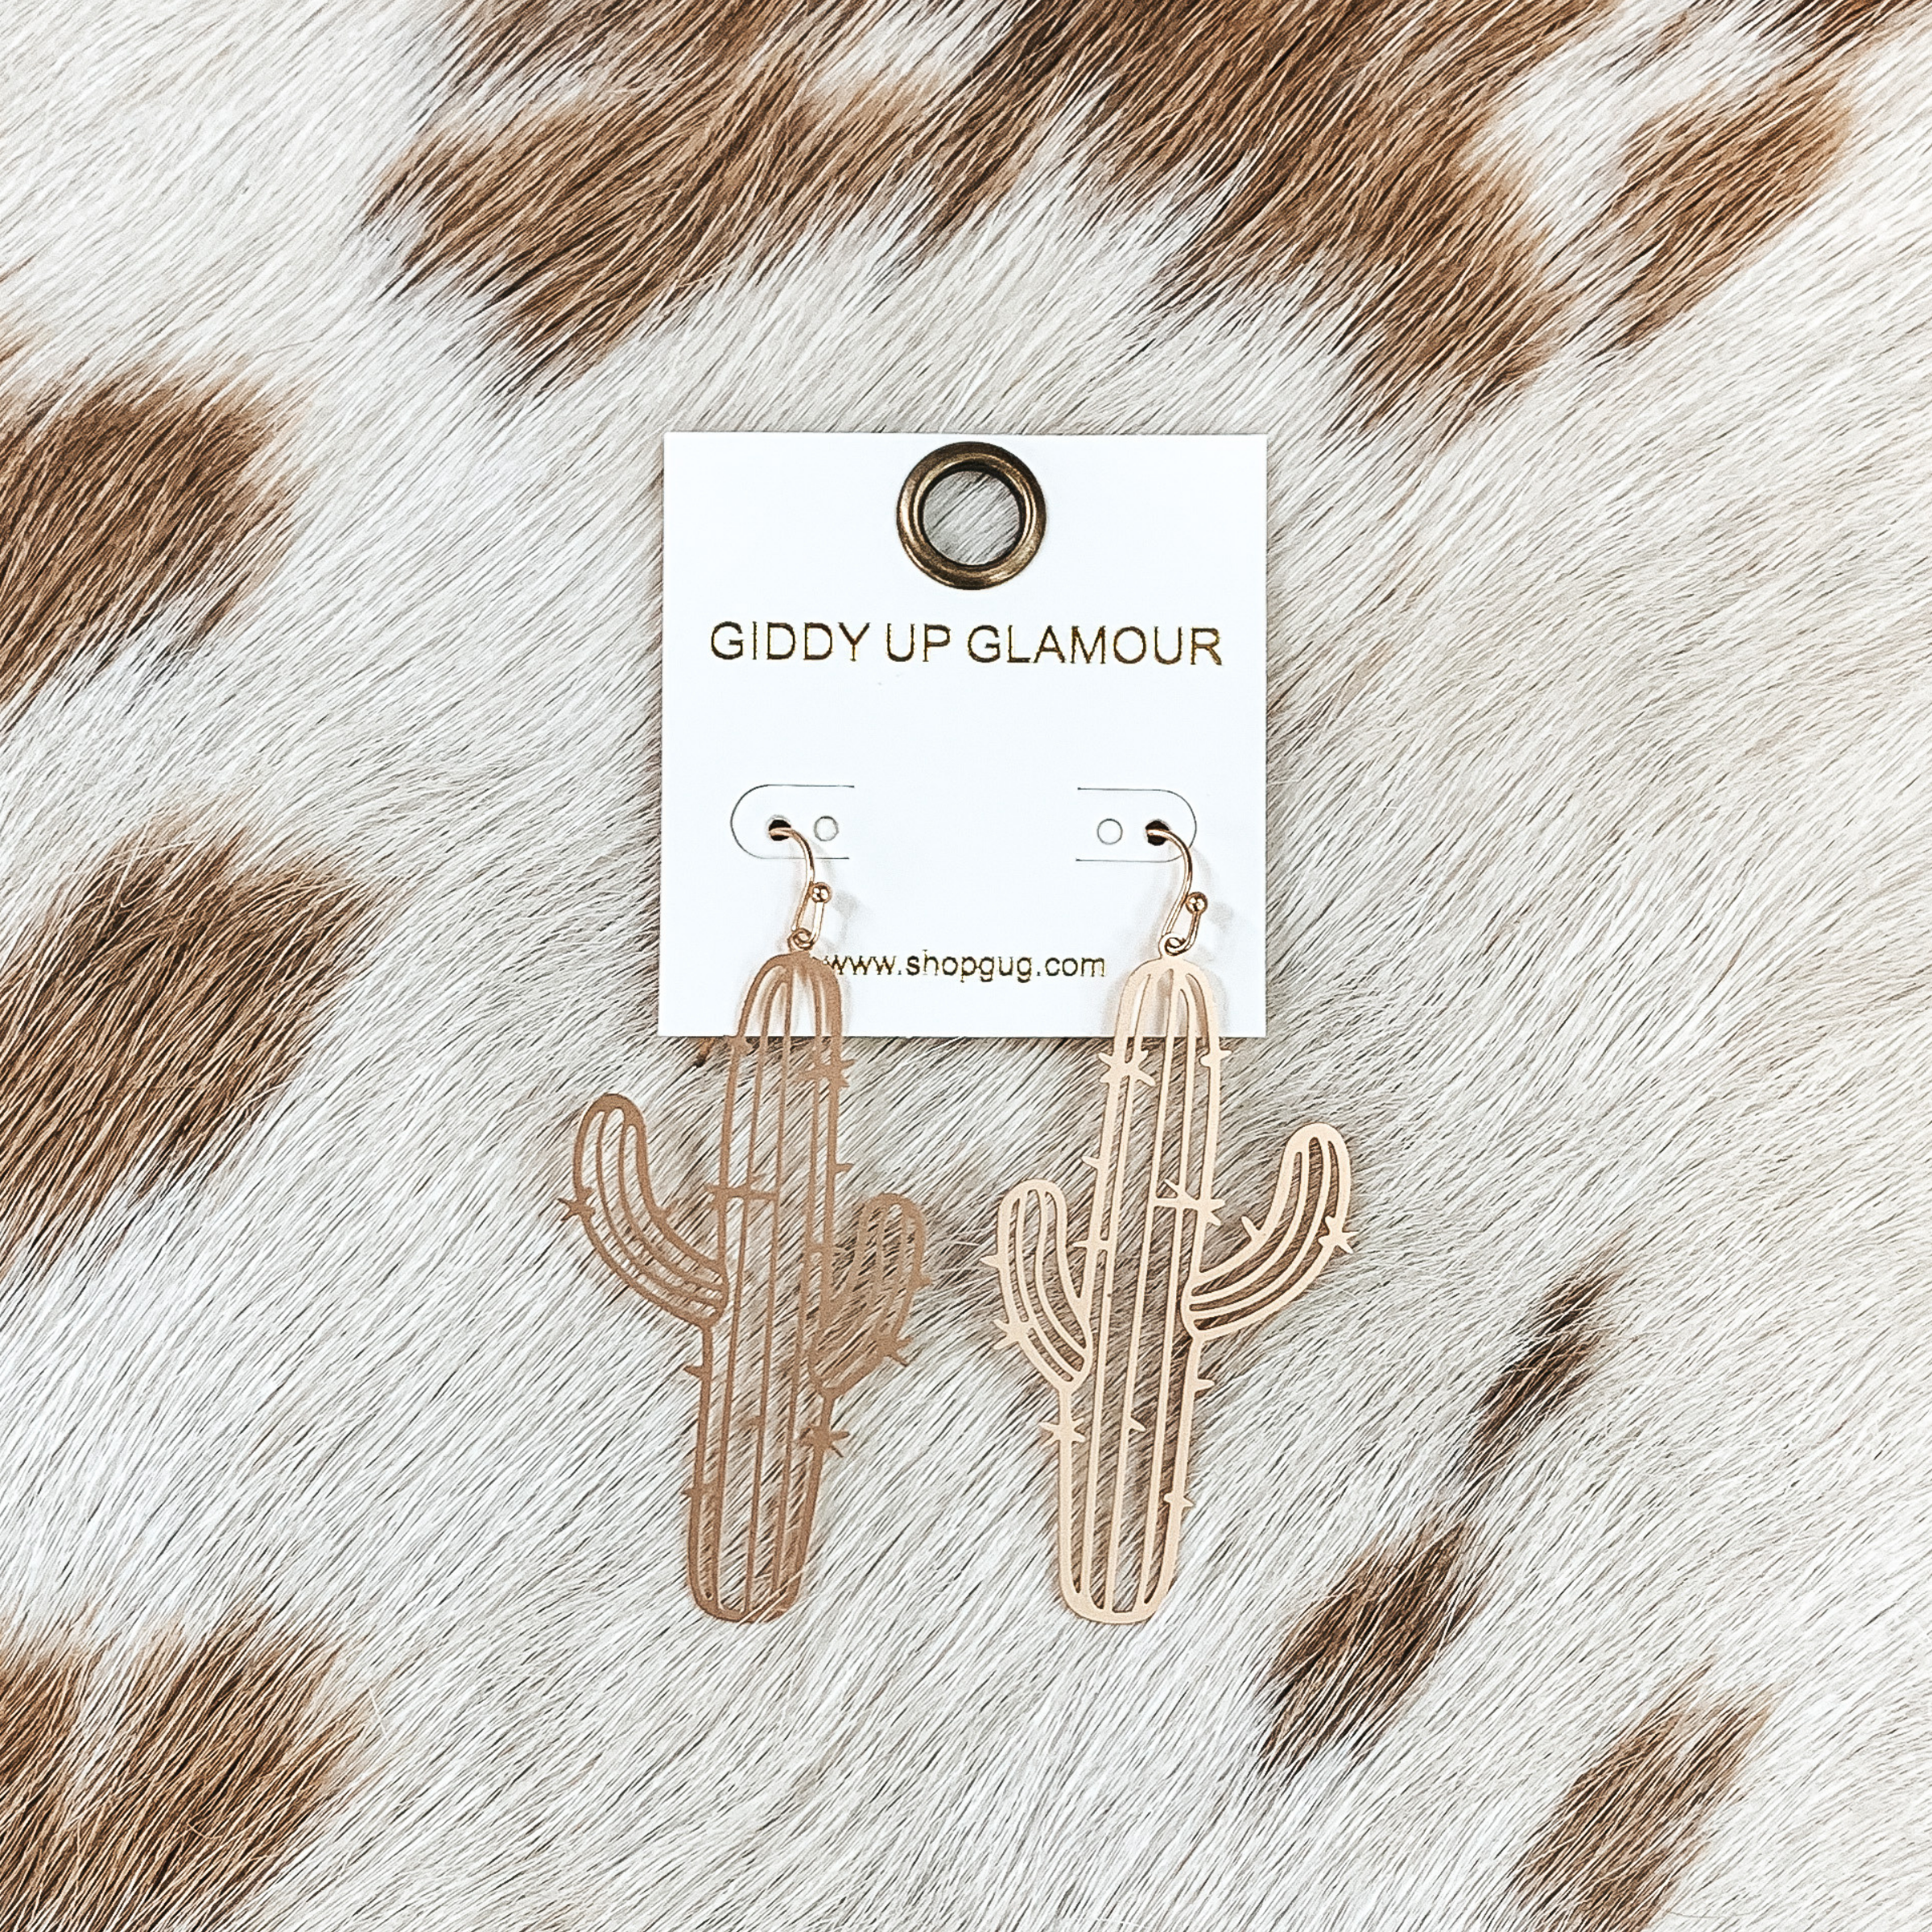 Desert Views Metal Cutout Earrings in Matte Gold Tone - Giddy Up Glamour Boutique